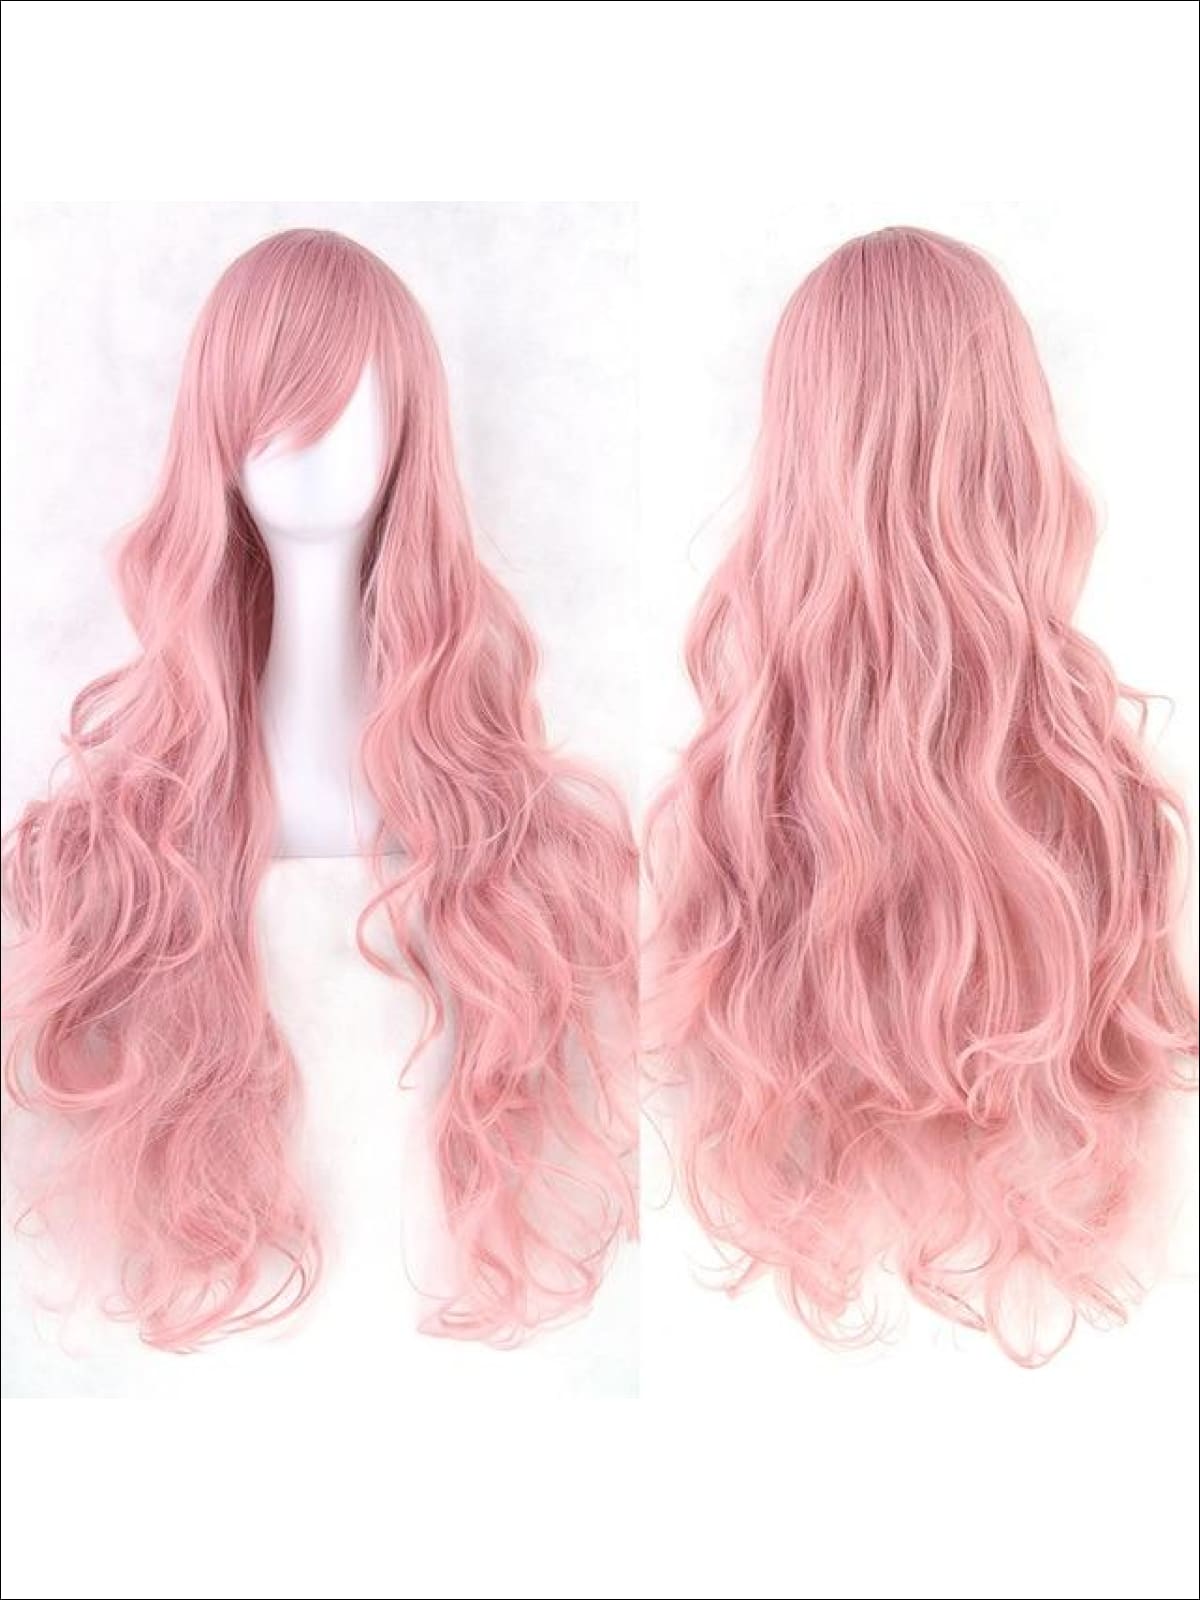 Girls Long Curly Dress Up Wig - Light Pink / One Size - Girls Halloween Costume